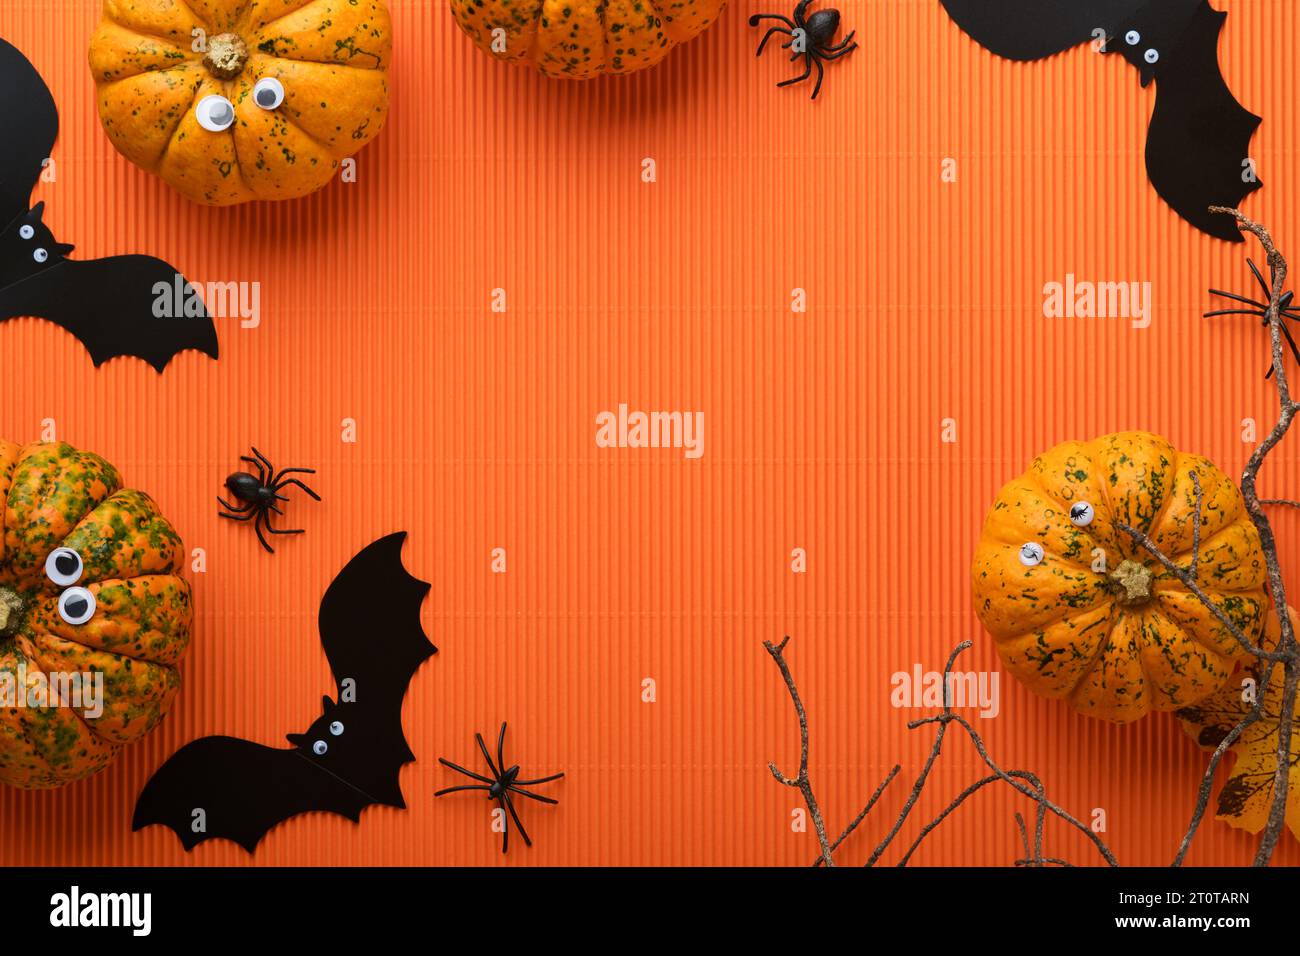 Halloween holiday background. Orange pumpkin, bat with funny eyes, spider, spider web, old leaves and branches from scary forest on orange background. Stock Photo